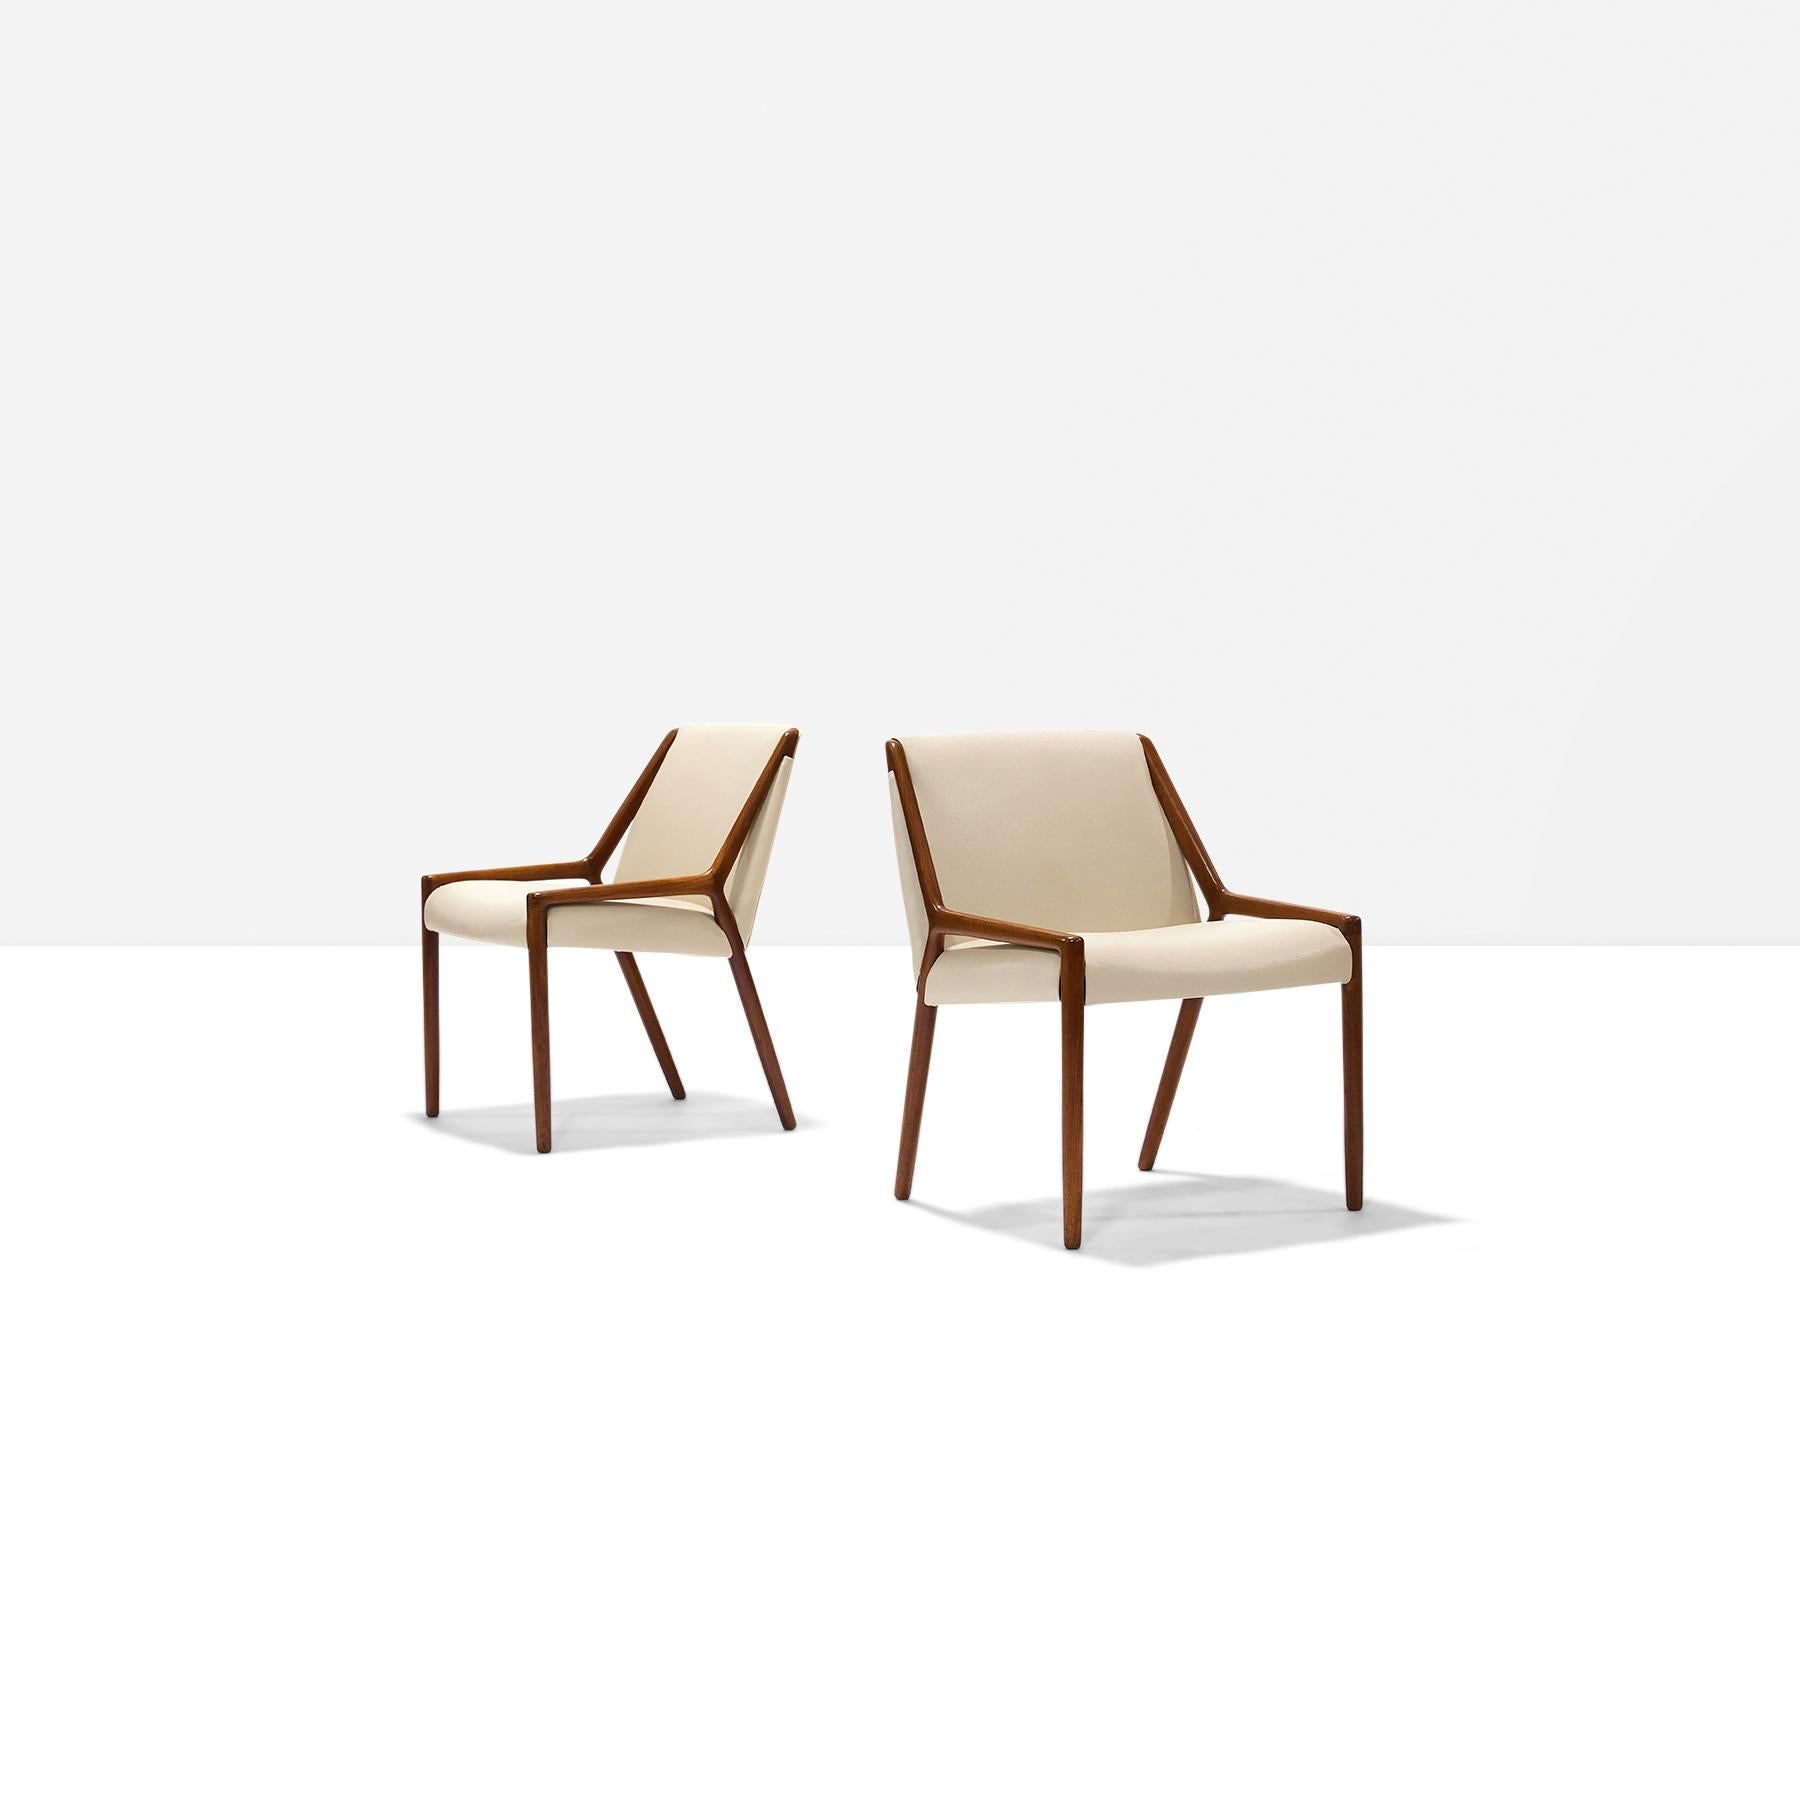 Pair of teak and leather occasional chairs by Ejner Larsen and Aksel Bender Madsen for Willy Beck.
Replaced cream colored leather. Chairs being sold as a set or separately. In excellent condition.